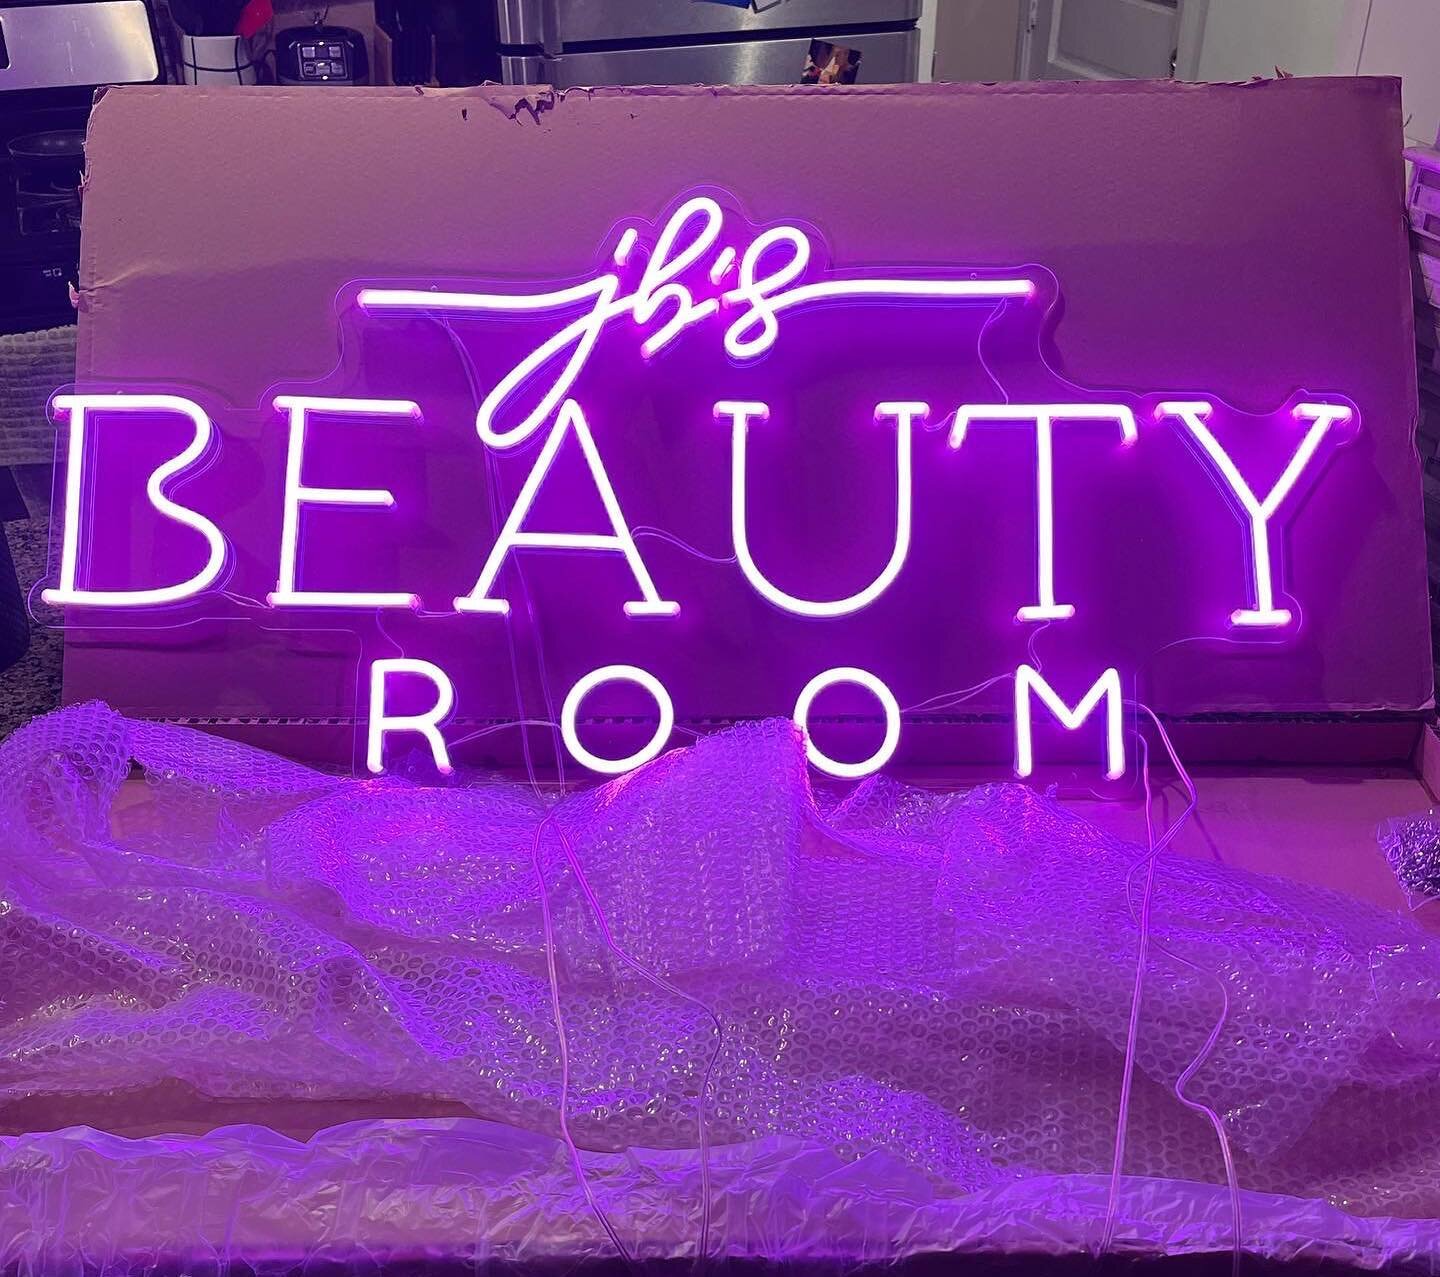 Happy 1st Anniversary to @jbsbeautyroom !!!! 
Things I&rsquo;ve learned in the first year:

&bull;Have Patience. When you are building a business from scratch in a world where not many people have done this before you, you have to be patient. The bui